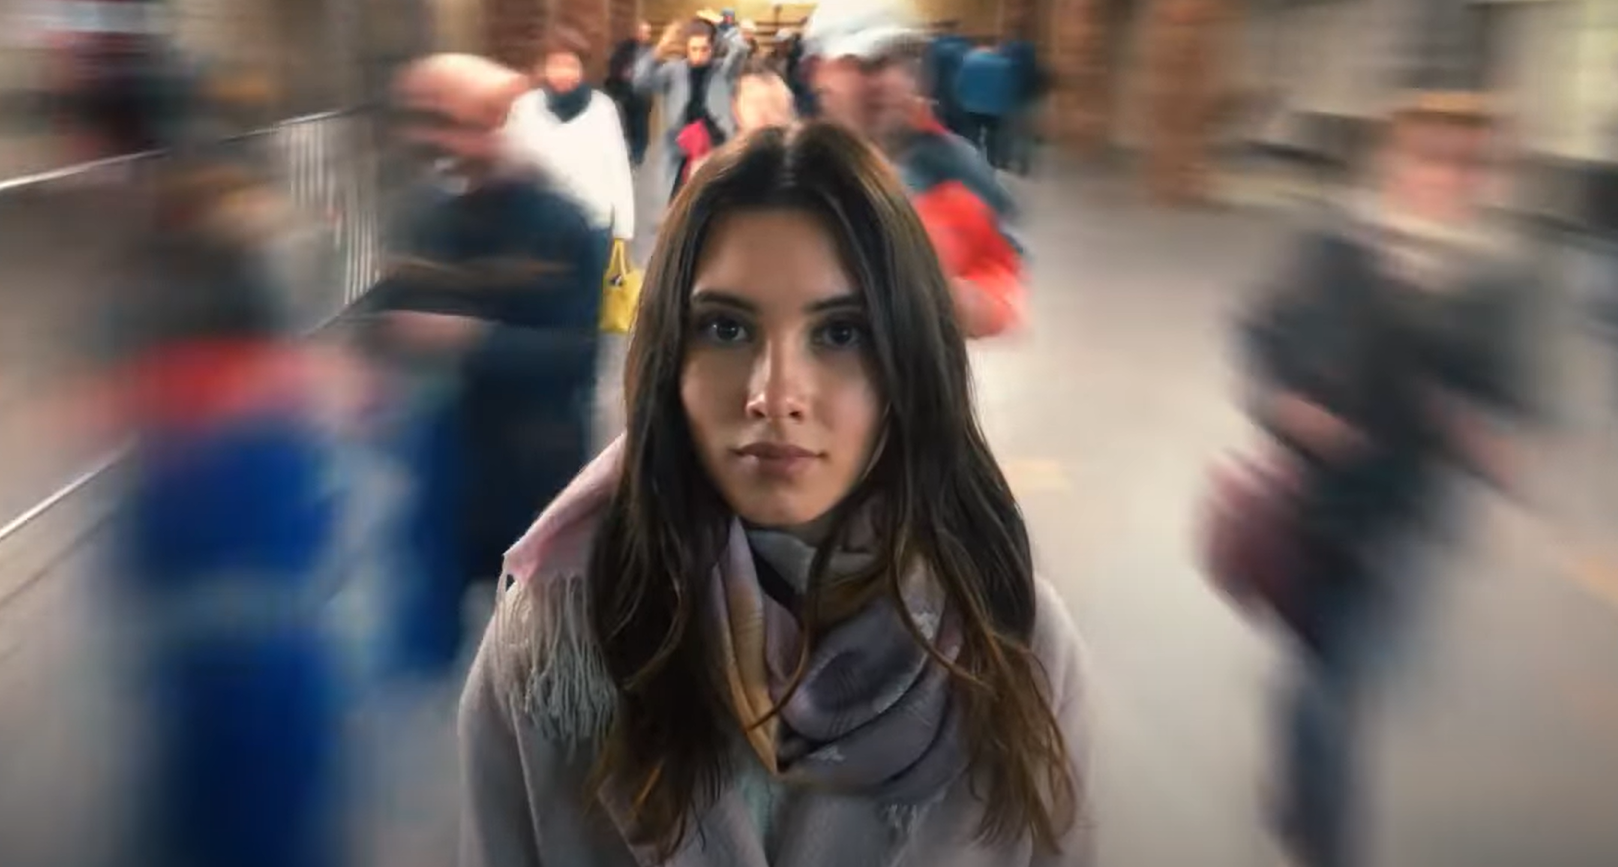 Person with long hair stands still and stares wide-eyed at the camera in a crowded public place, with blurry people buzzing around them.